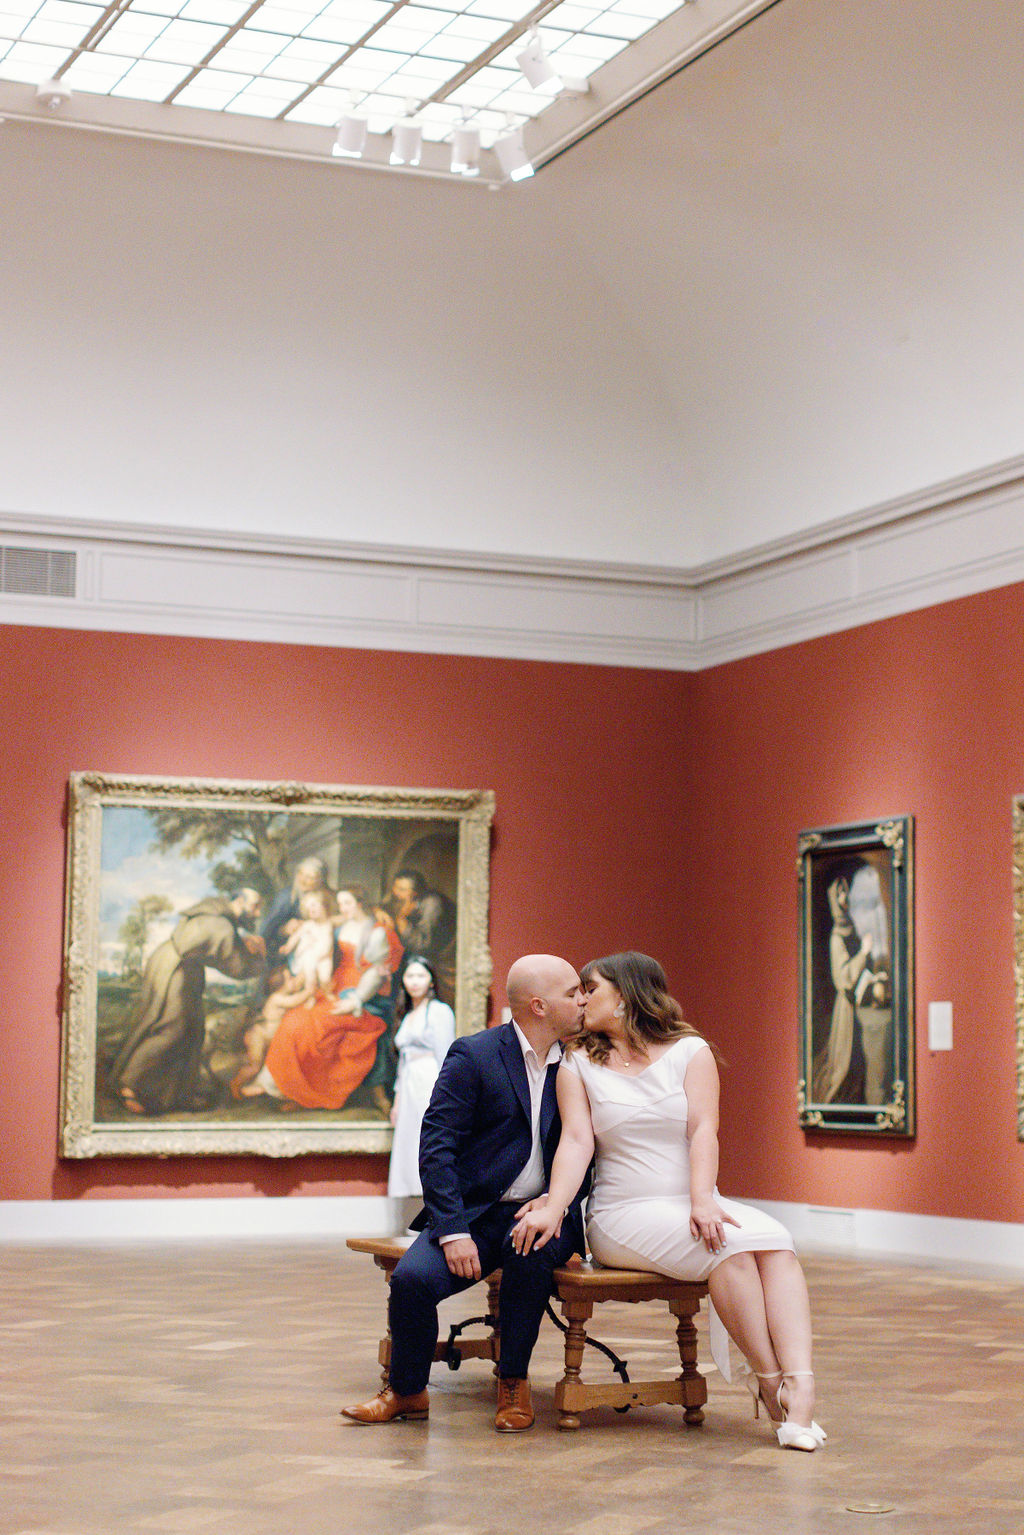 Engagement photo of Jimmy and Hannah  kissing on a bench surrounded by art at San Diego Museum of art. |Photo by California Photographer Sarah Block Photography